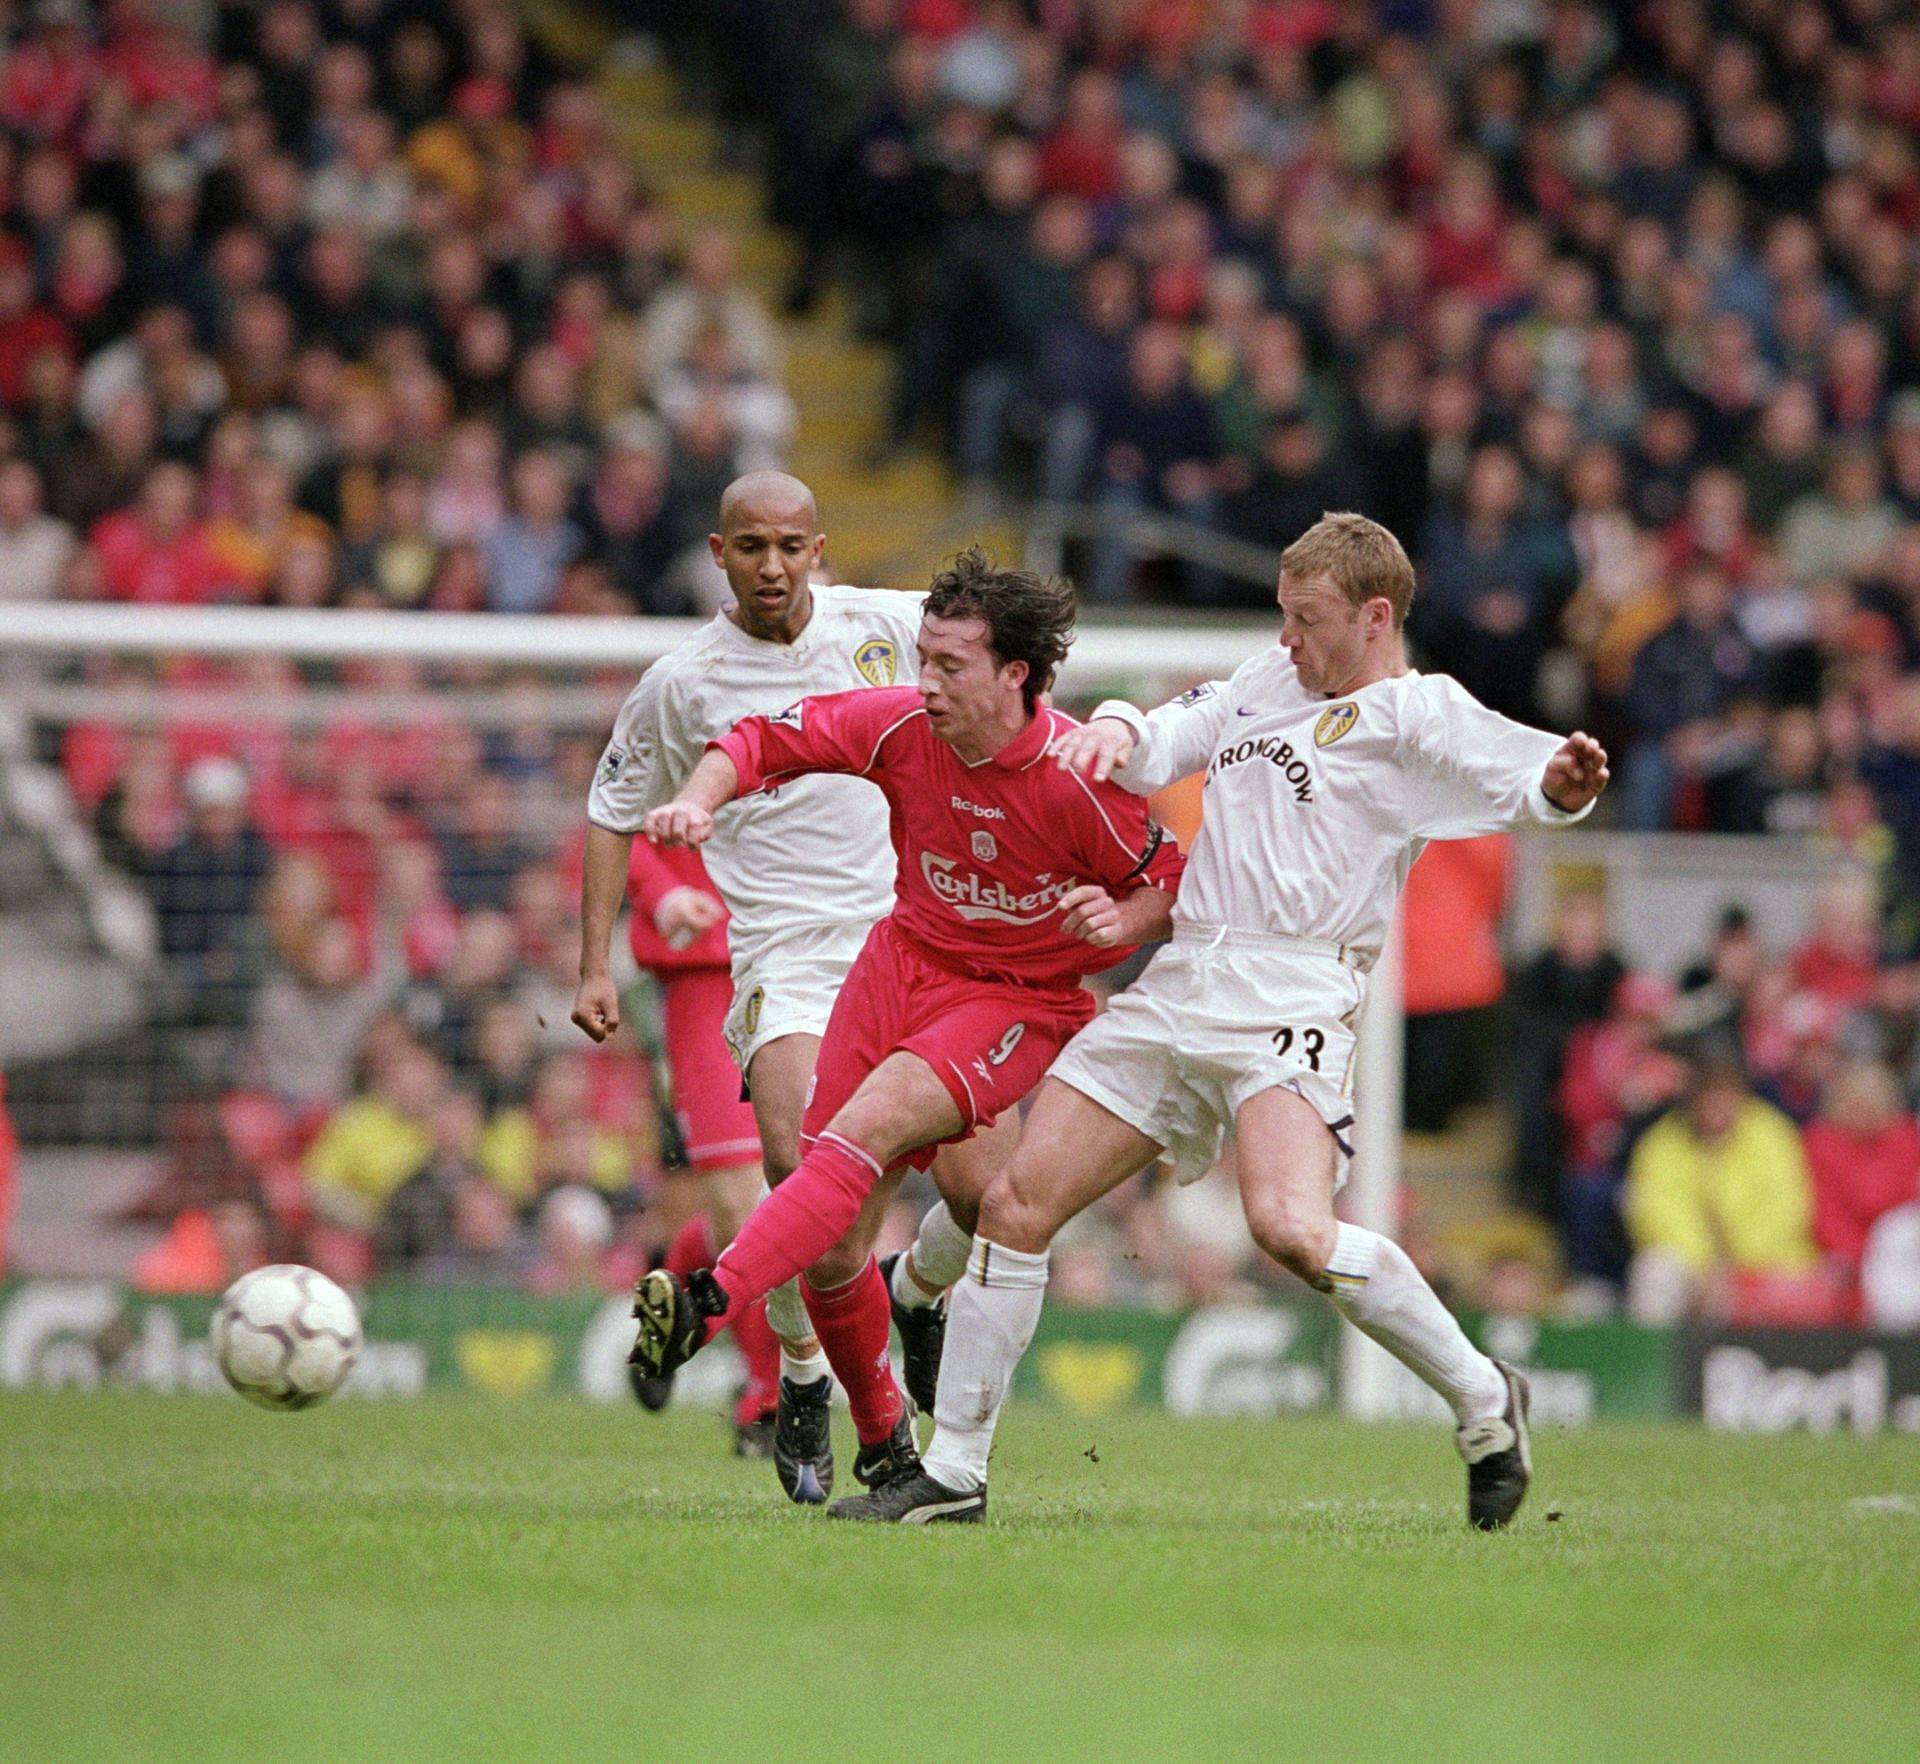 Robbie Fowler was the youngest scorer of 100 league goals in 1999 